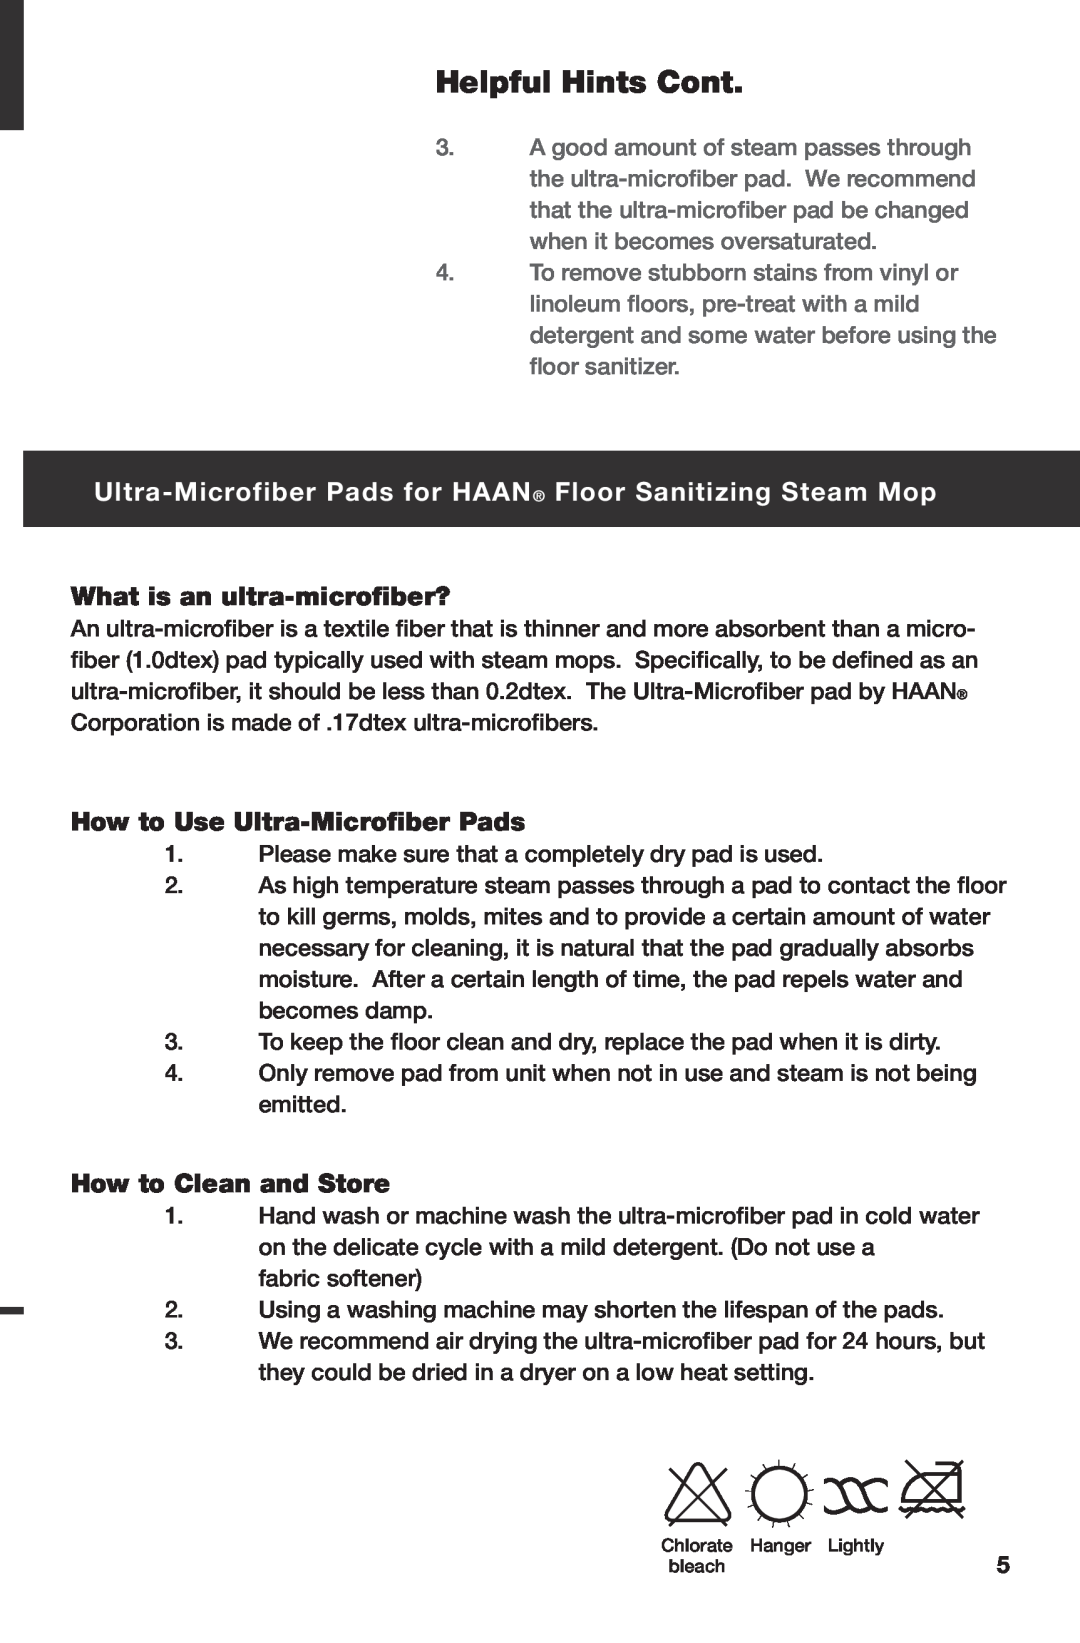 Haan SI-70 Helpful Hints Cont, What is an ultra-microfiber?, How to Use Ultra-MicrofiberPads, How to Clean and Store 